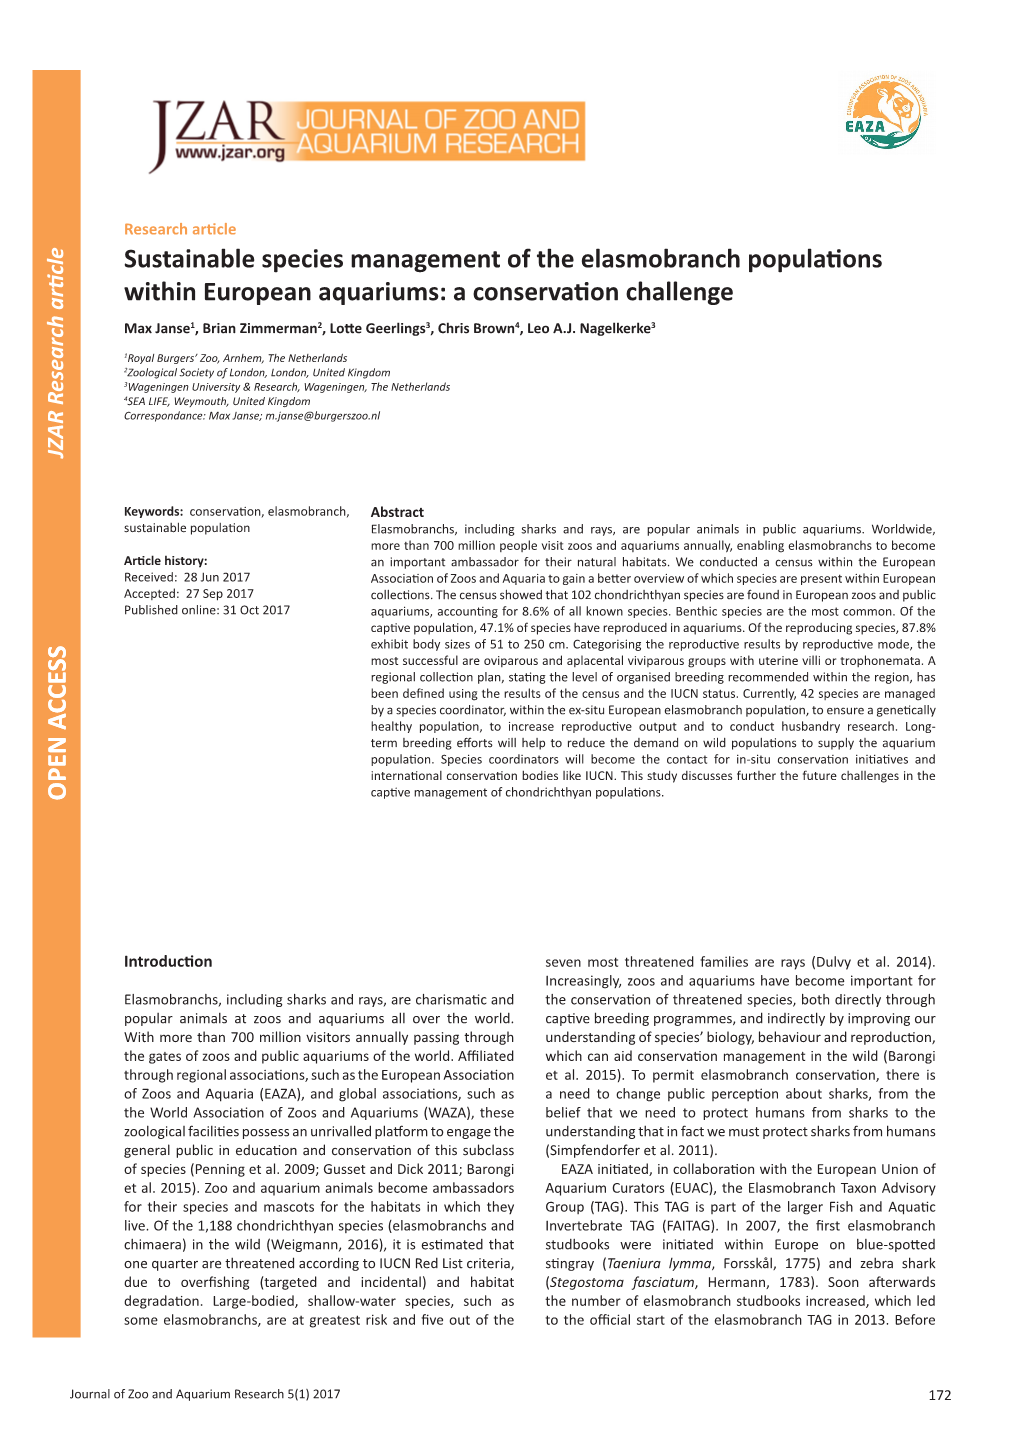 Sustainable Species Management of the Elasmobranch Populations